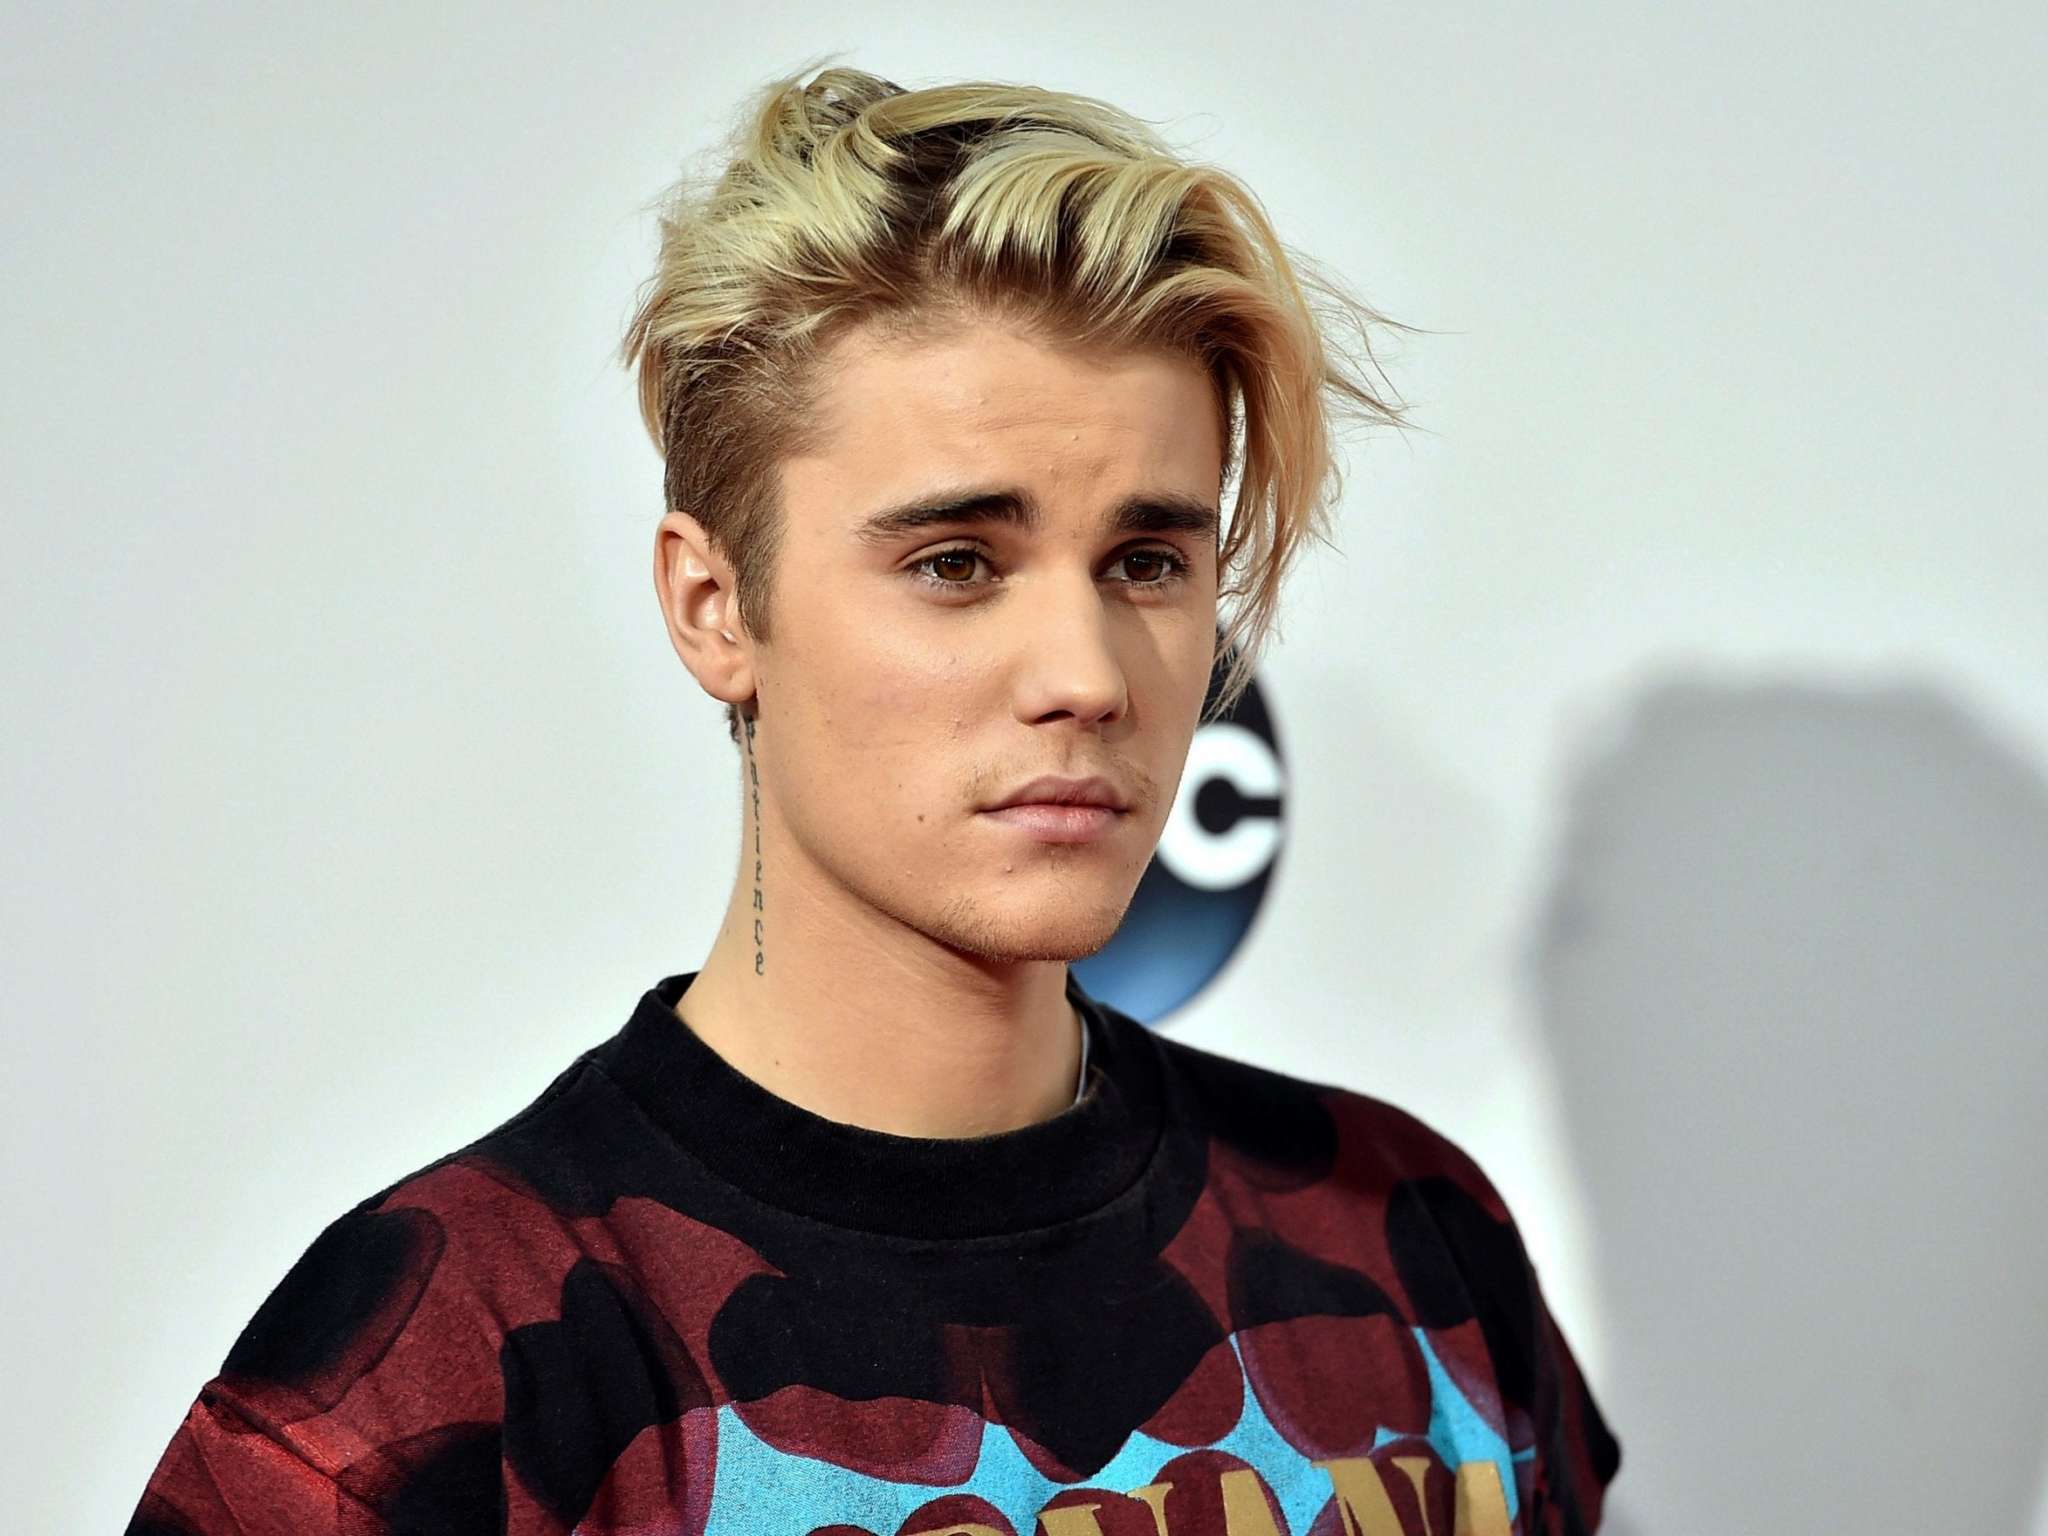 Justin Bieber Opens Up About His Troubled Past And Heavy Drug Abuse